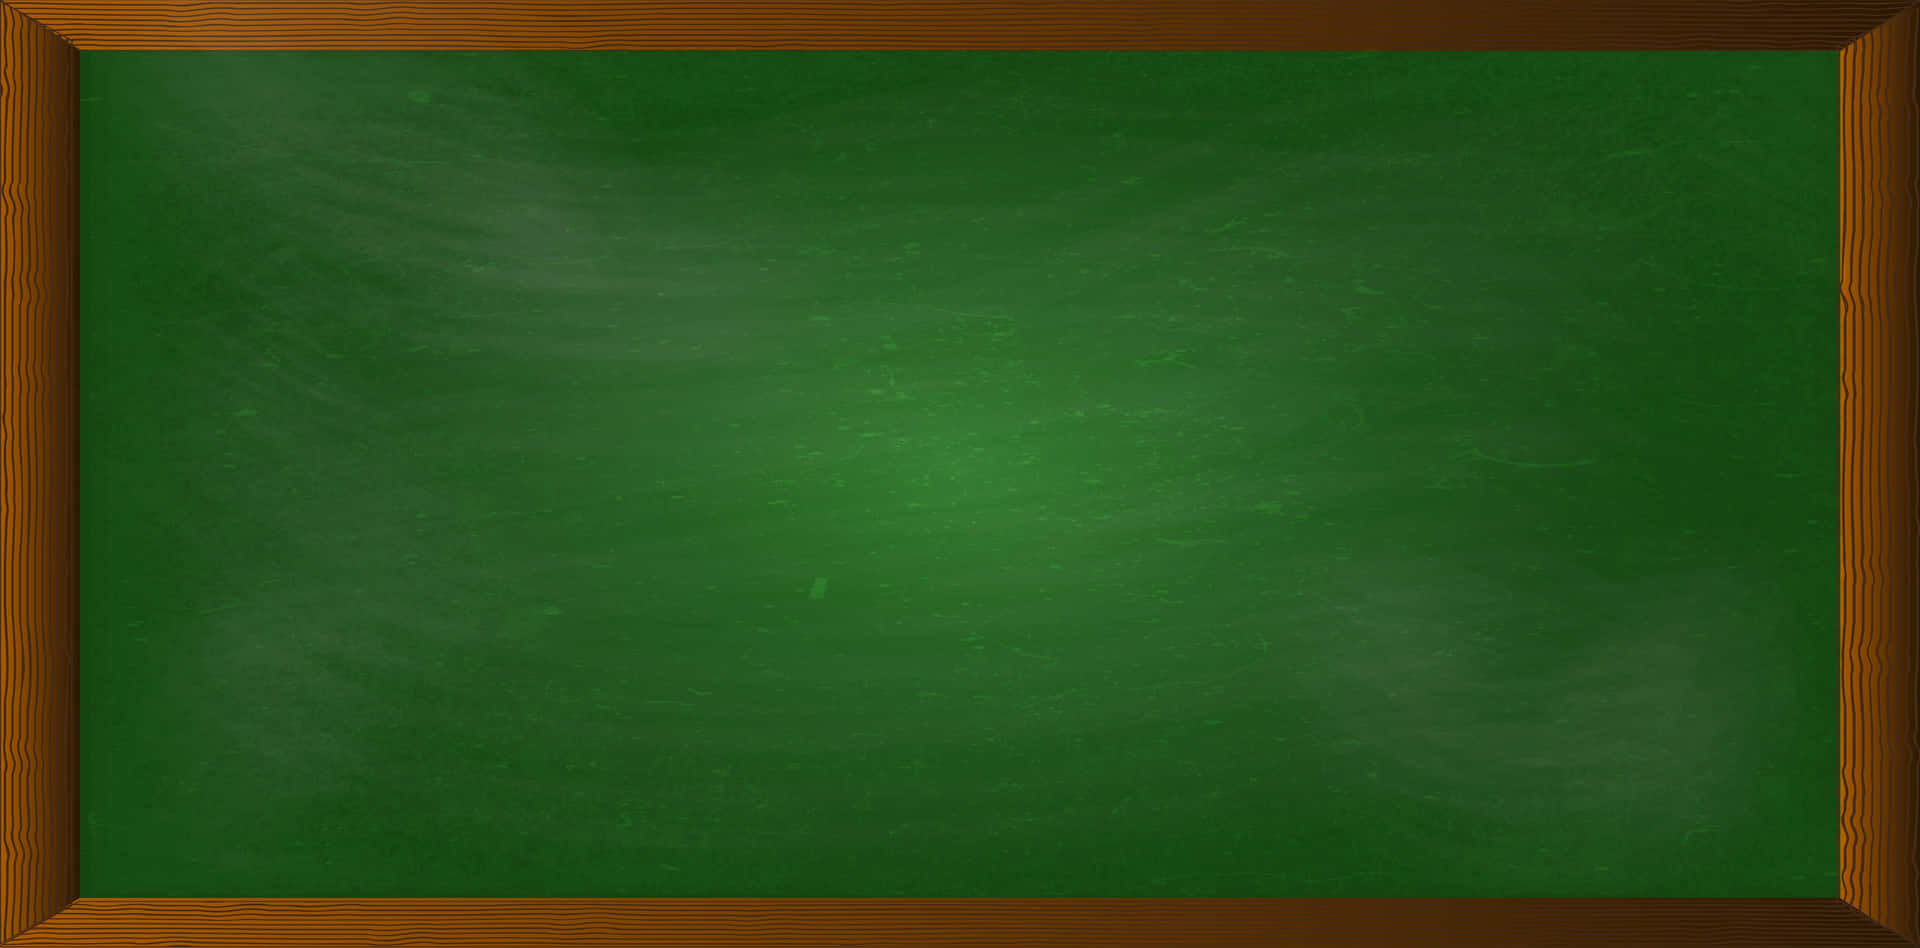 A fresh green chalkboard background perfect for educating and inspiring